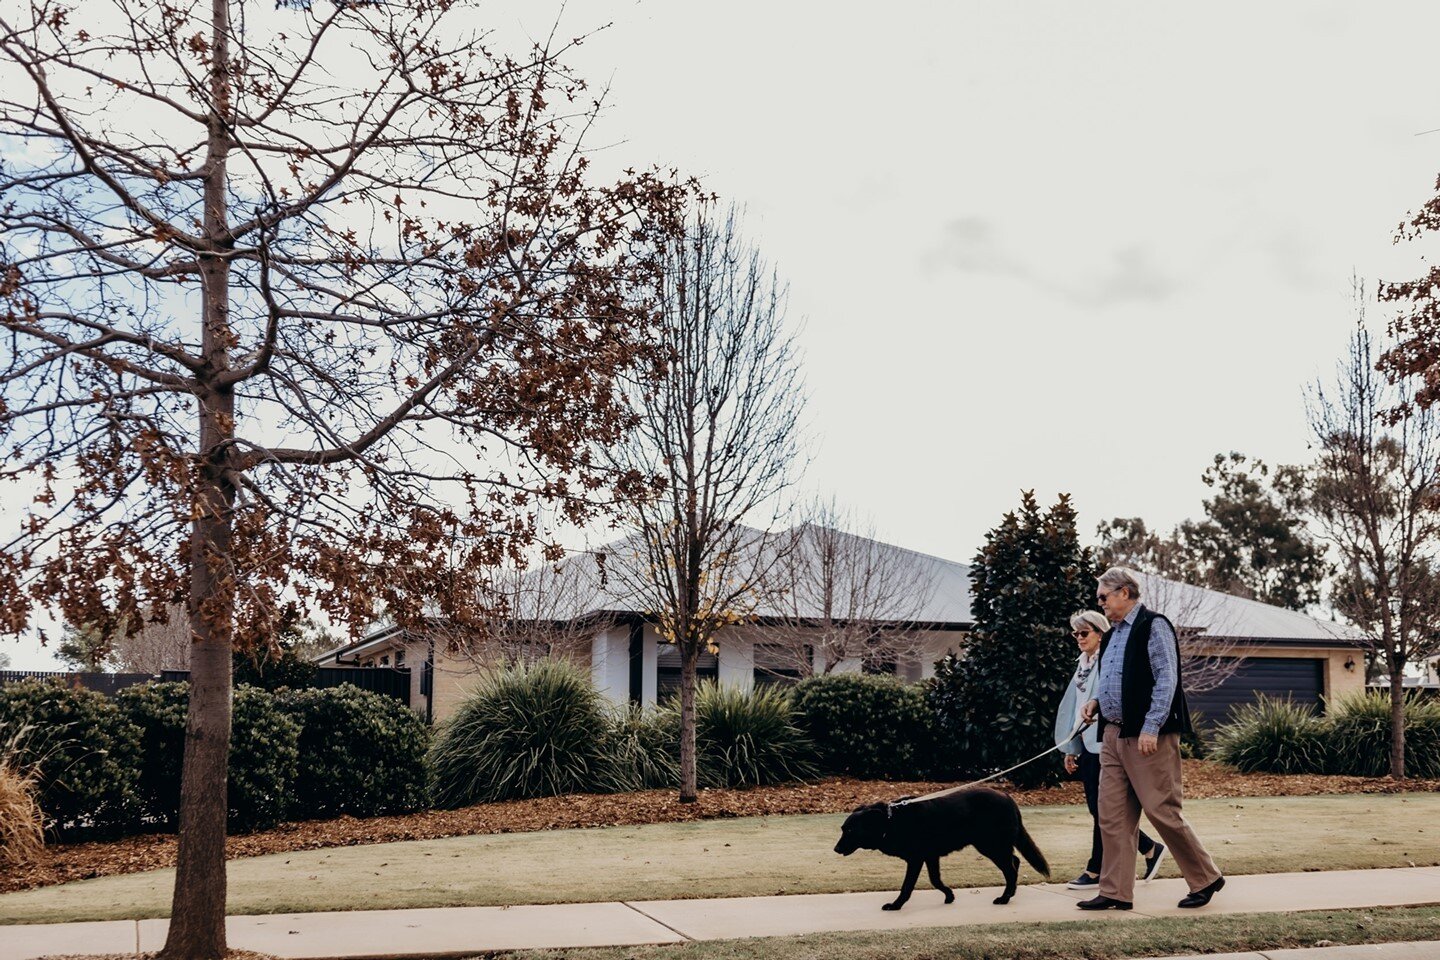 Walking into the weekend like.... ⁠
⁠
Do you want more information about our lots? Don't hesitate to contact our agents: ⁠
Richard Tegart 0418 634 868 @raywhitedubbo ⁠
Michael Redden 0409 844 036 @reddenfamily Real Estate